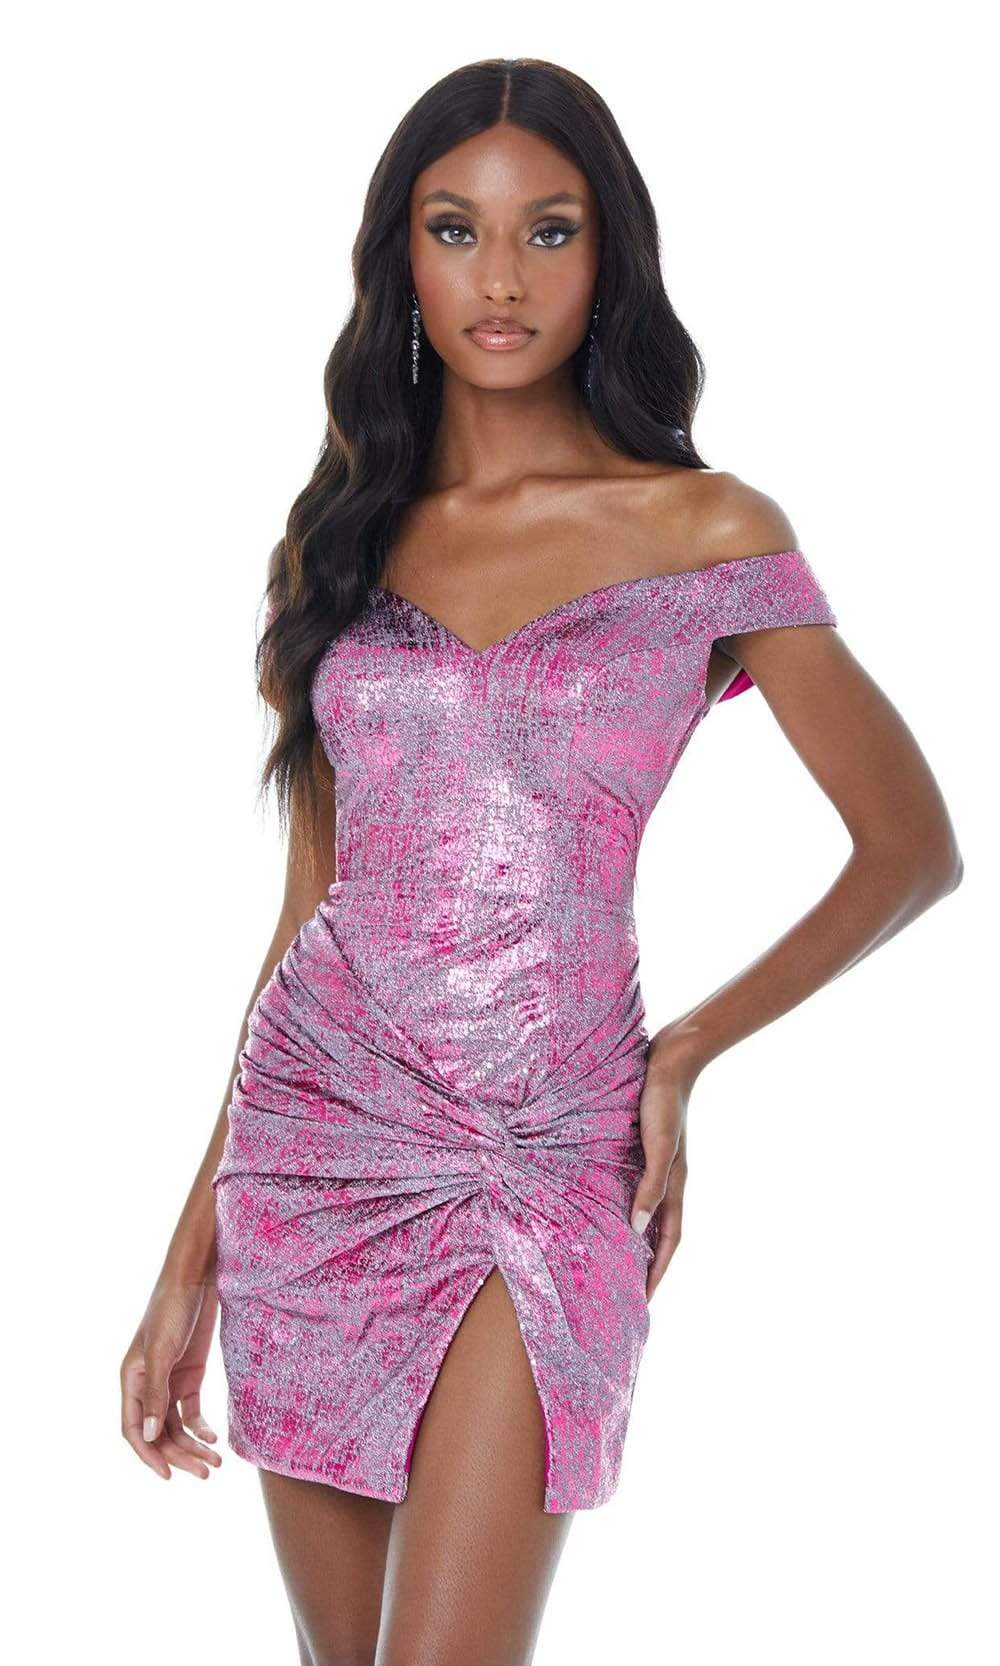 Ashley Lauren - 4428 Twist Knot Fitted Shimmer Cocktail Dress With Slit - 1 pc Fuchsia In Size 4 Available CCSALE 4 / Fuchsia